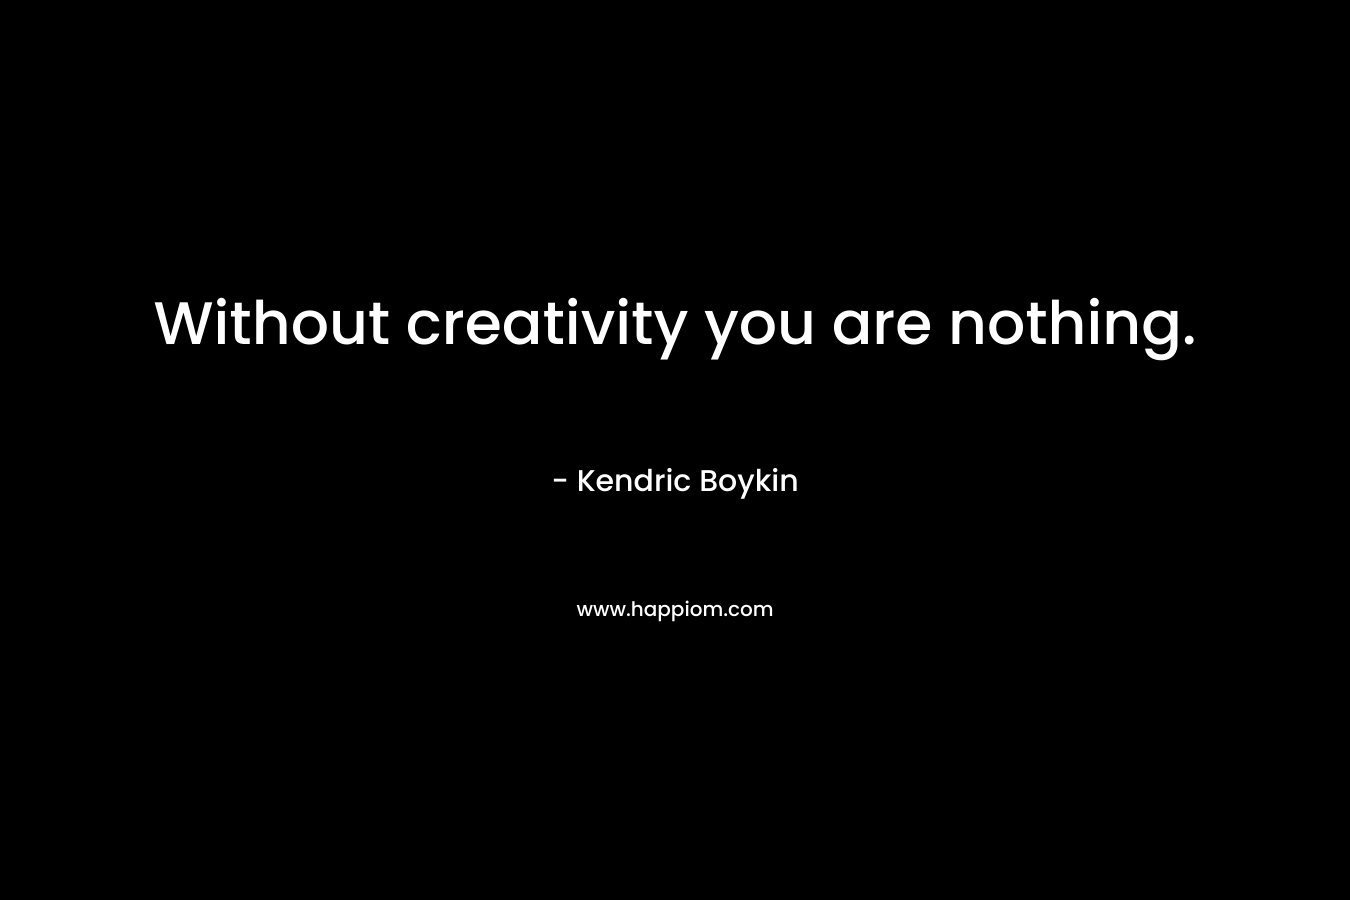 Without creativity you are nothing.